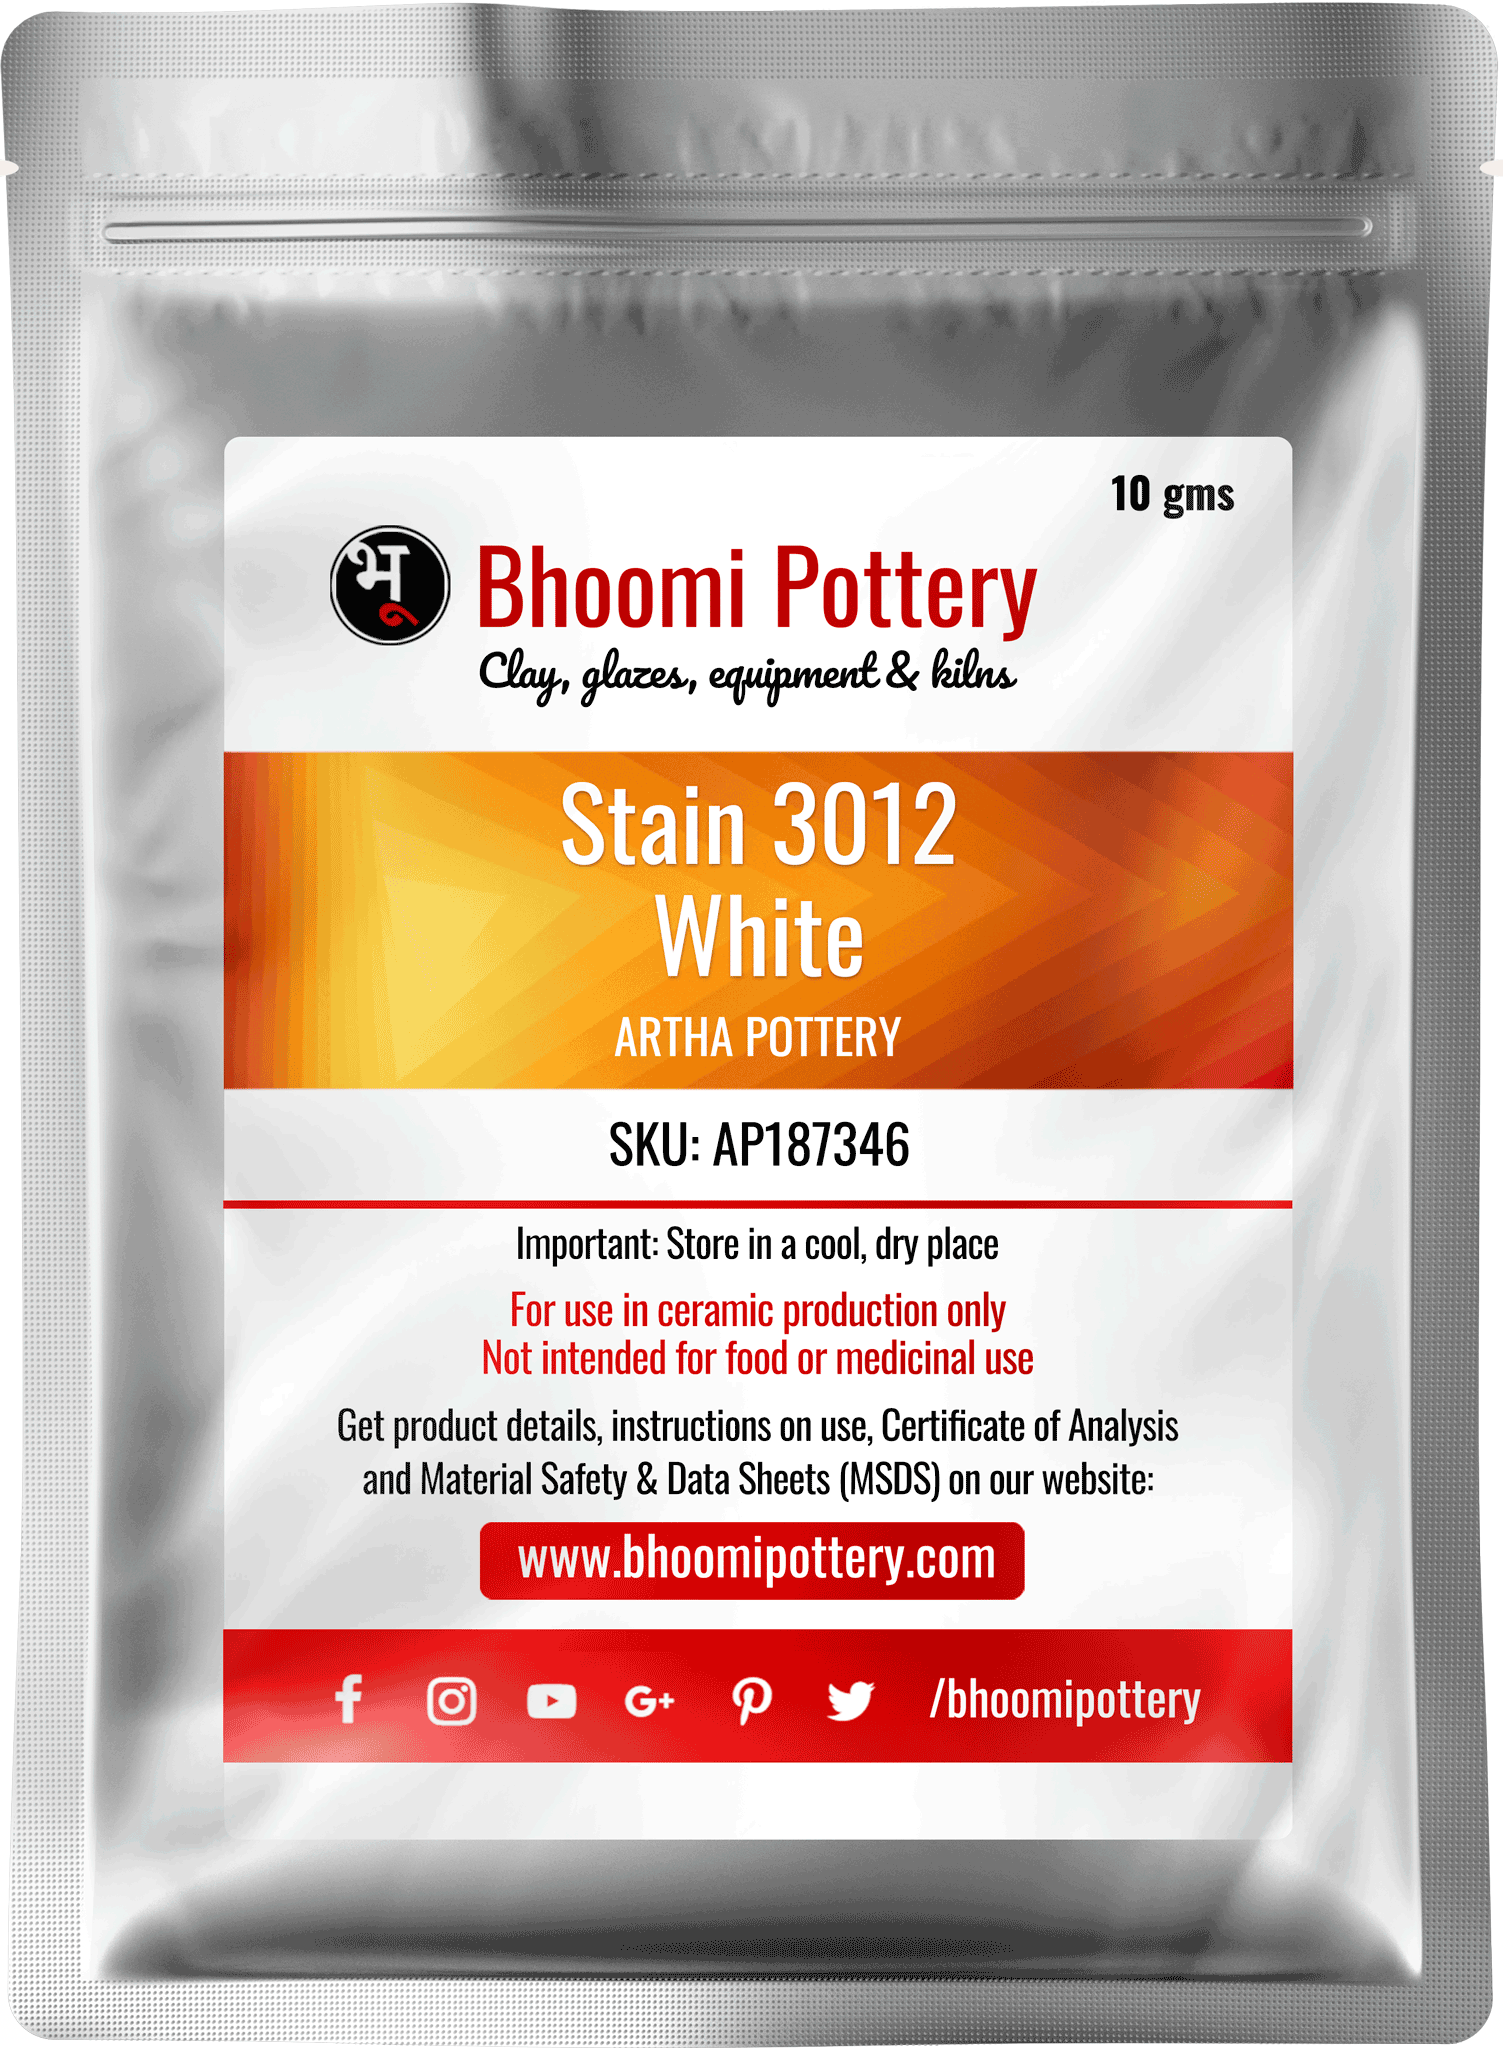 Artha Pottery Ceramic Stain 3012 100 gms for sale in India - Bhoomi Pottery